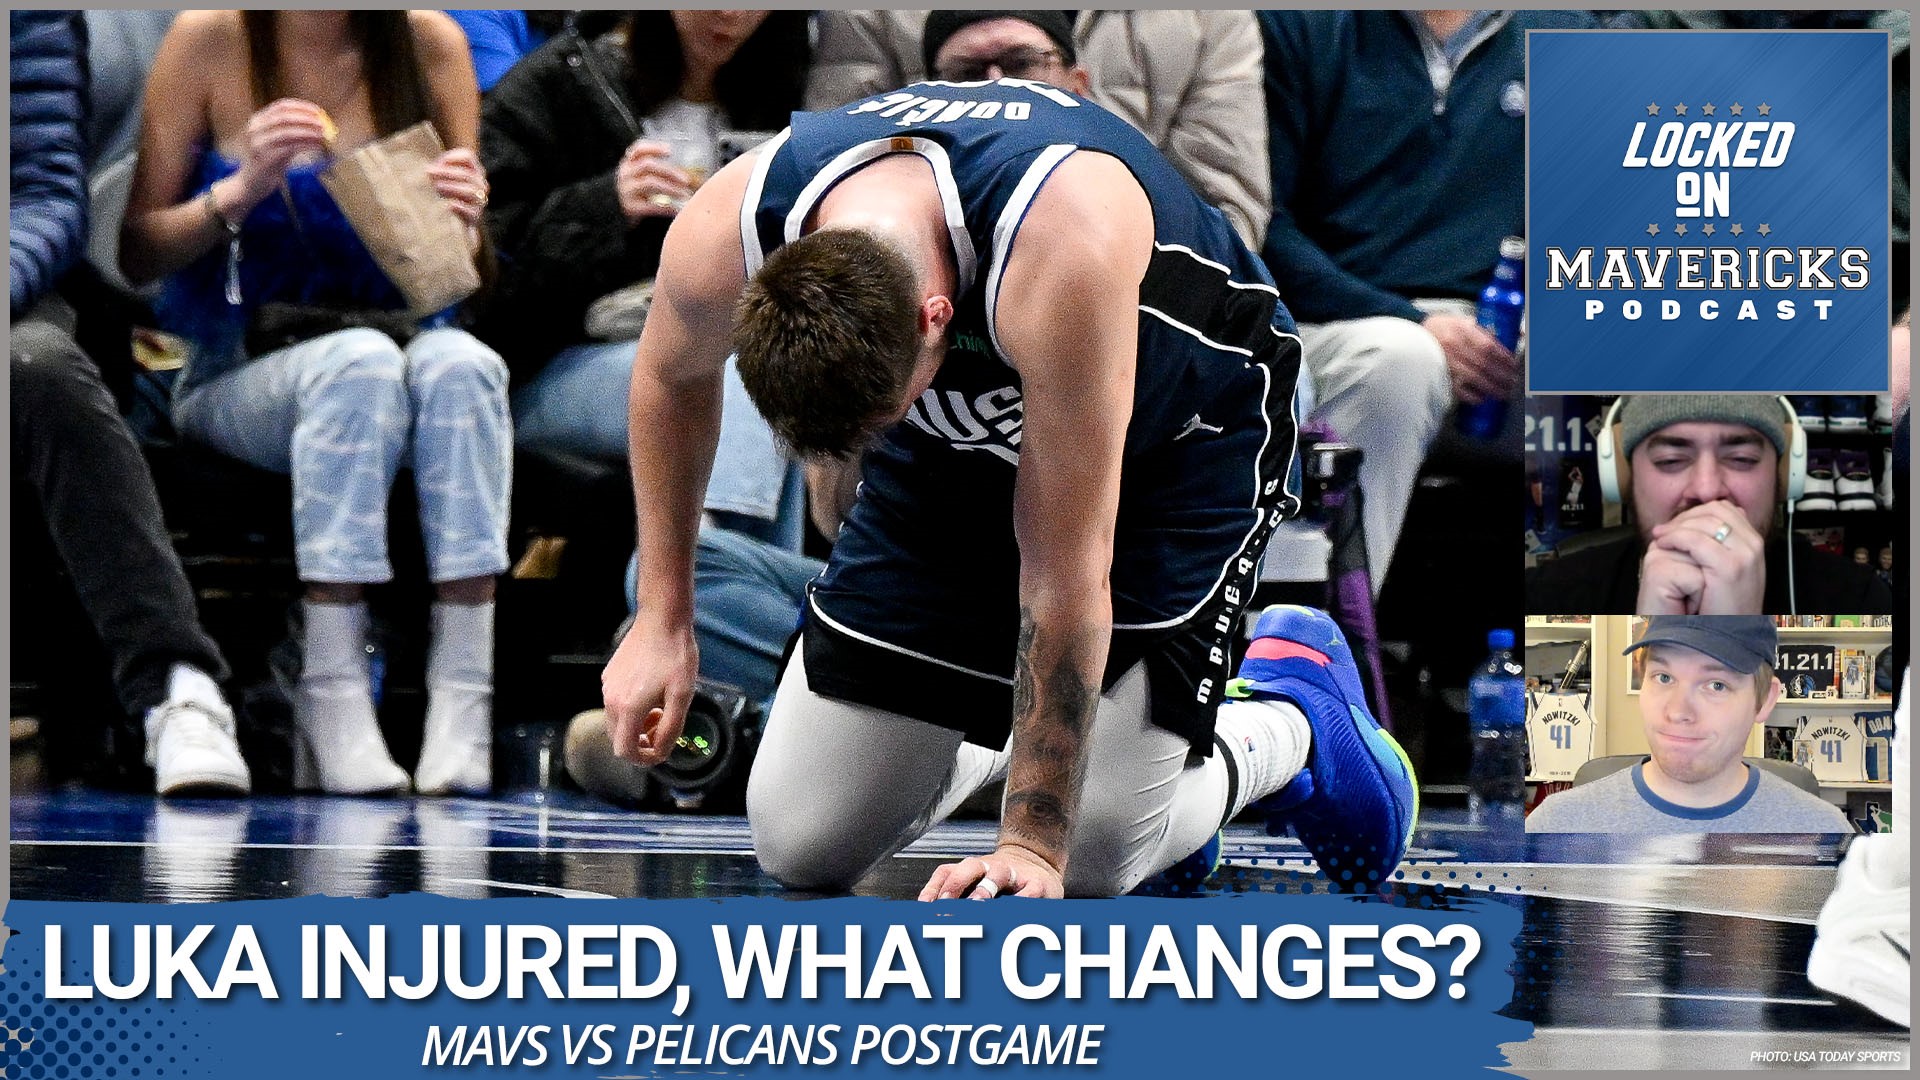 Nick Angstadt & Isaac Harris breakdown the Mavs win and react to Luka Doncic’s injury.